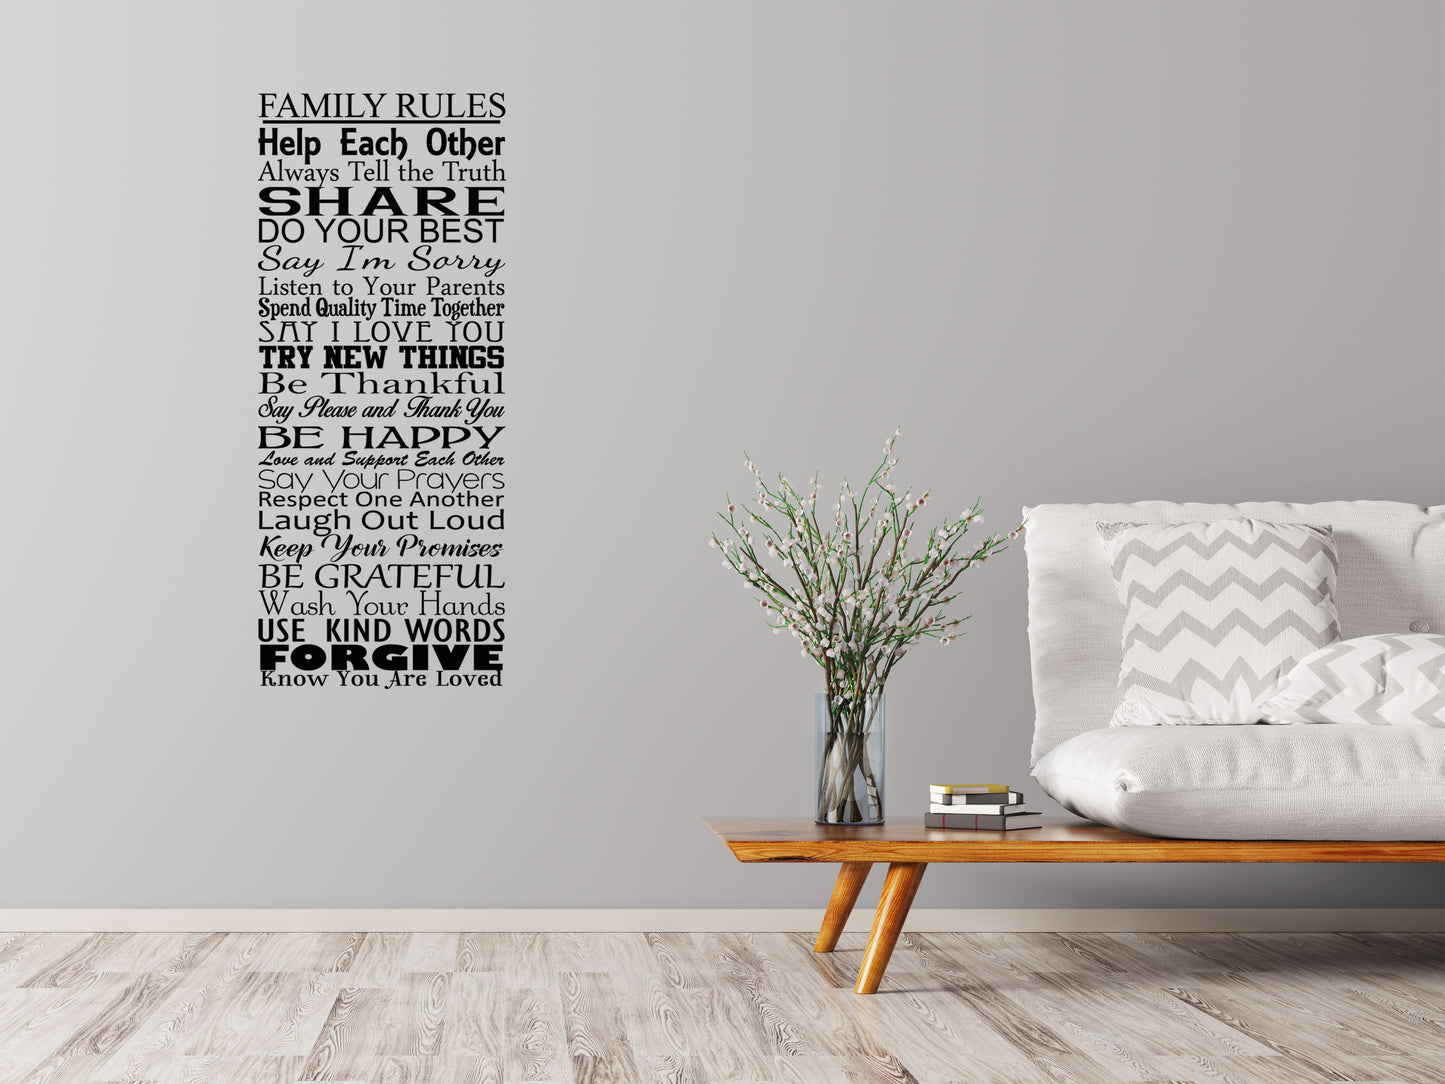 Family Rules Vinyl Wall Decal Decor - Family Wall Decal - Living Room Decal - Family Room Decal - Family Rules Quotes Vinyl Wall Decal Inspirational Wall Signs 